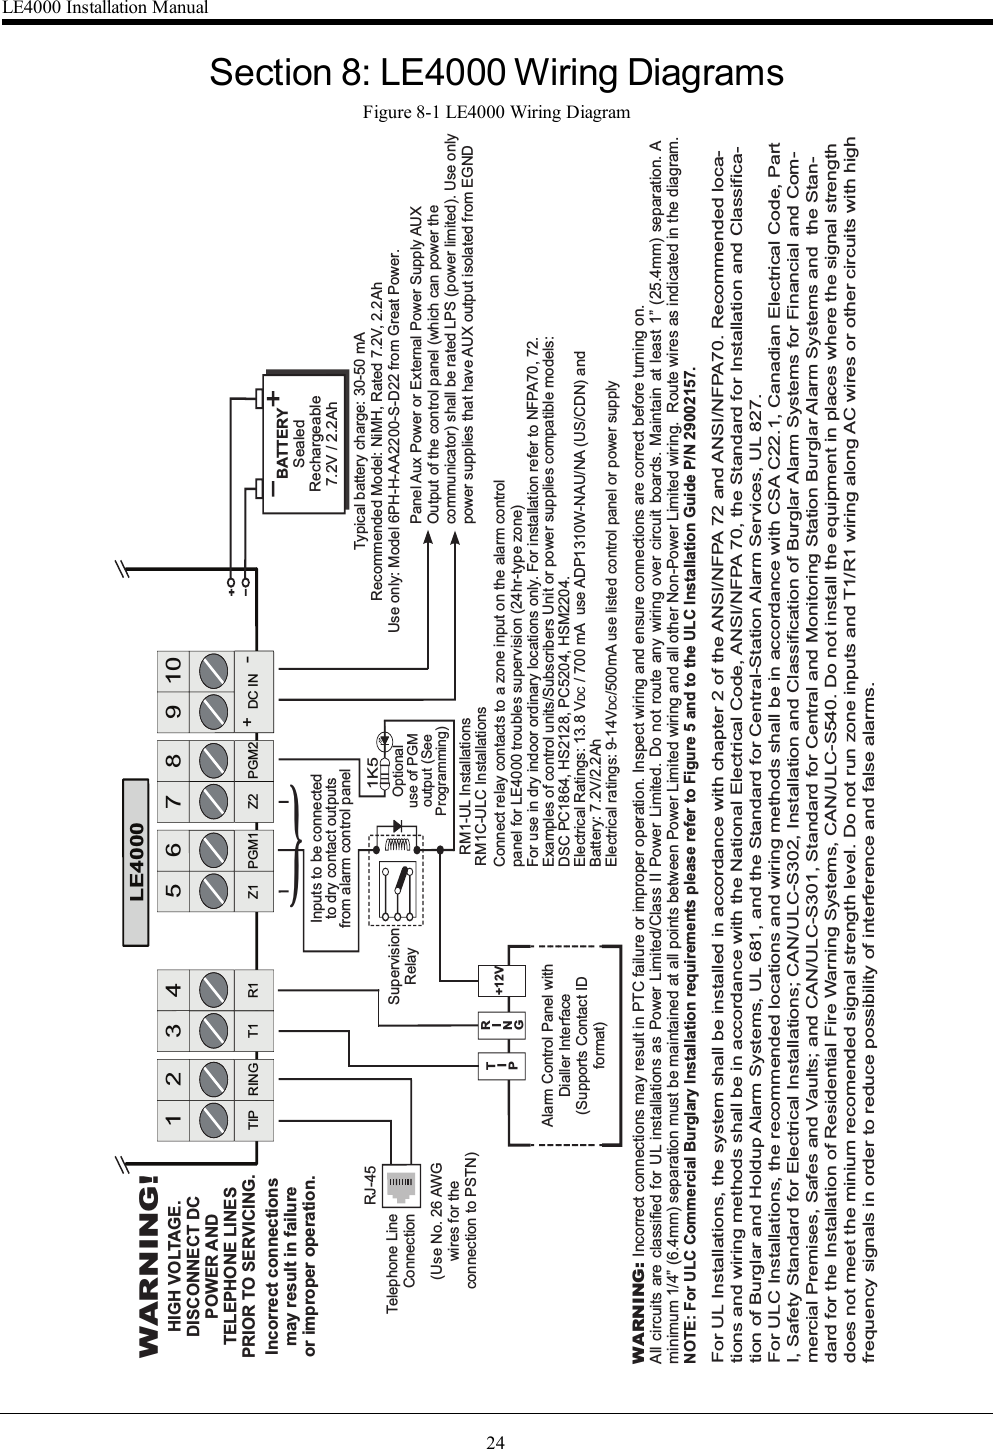 24Section 8: LE4000 Wiring DiagramsFigure 8-1 LE4000 Wiring DiagramSupervisionRelay Optionaluse of PGMoutput (SeeProgramming)WARNING: Incorrect connections may result in PTC failure or improper operation. Inspect wiring and ensure connections are correct before turning on.All circuits are classified for UL installations as Power Limited/Class II Power Limited. Do not route any wiring over circuit  boards. Maintain  at least  1” (25.4mm)  separation. A minimum 1/4” (6.4mm) separation must be maintained at all points between Power Limited wiring and all other Non-Power Limited wiring.  Route wires as indicated in the diagram.NOTE: For ULC Commercial Burglary Installation requirements please refer to Figure 5 and to the ULC Installation Guide P/N 29002157.Telephone LineConnectionRJ-45For use in dry indoor ordinary locations only. For installation refer to NFPA70, 72.Examples of control units/Subscribers Unit or power supplies compatible models: DSC PC1864, HS2128, PC5204, HSM2204. Electrical Ratings: 13.8 VDC / 700 mA  use ADP1310W-NAU/NA (US/CDN) and Battery: 7.2V/2.2Ah Electrical ratings: 9-14VDC/500mA use listed control panel or power supplyAlarm Control Panel withDialler Interface(Supports Contact ID format)BATTERYSealedRechargeable7.2V / 2.2AhRM1-UL InstallationsRM1C-ULC InstallationsConnect relay contacts to a zone input on the alarm control panel for LE4000 troubles supervision (24hr-type zone)TIPRINGPanel Aux Power or External Power Supply AUX Output of the control panel (which can power the communicator) shall be rated LPS (power limited). Use only power supplies that have AUX output isolated from EGND Typical battery charge: 30-50 mARecommended Model: NiMH, Rated 7.2V, 2.2AhUse only: Model 6PH-H-AA2200-S-D22 from Great Power. LE4000TIP RING T1 R1 Z1 PGM1 Z2 PGM2 DC IN+-12345679810WARNING!HIGH VOLTAGE.DISCONNECT DCPOWER ANDTELEPHONE LINESPRIOR TO SERVICING.Incorrect connectionsmay result in failureor improper operation.}Inputs to be connectedto dry contact outputsfrom alarm control panel(Use No. 26 AWG wires for theconnection to PSTN)+12V1K5For UL Installations, the system shall be installed in accordance with chapter 2 of the ANSI/NFPA 72 and ANSI/NFPA70. Recommended loca-tions and wiring methods shall be in accordance with the National Electrical Code, ANSI/NFPA 70, the Standard for Installation and Classifica-tion of Burglar and Holdup Alarm Systems, UL 681, and the Standard for Central-Station Alarm Services, UL 827.For ULC Installations, the recommended locations and wiring methods shall be in accordance with CSA C22.1, Canadian Electrical Code, PartI, Safety Standard for Electrical Installations; CAN/ULC-S302, Installation and Classification of Burglar Alarm Systems for Financial and Com-mercial Premises, Safes and Vaults; and CAN/ULC-S301, Standard for Central and Monitoring Station Burglar Alarm Systems and  the Stan-dard for the Installation of Residential Fire Warning Systems, CAN/ULC-S540. Do not install the equipment in places where the signal strengthdoes not meet the minium recomended signal strength level. Do not run zone inputs and T1/R1 wiring along AC wires or other circuits with highfrequency signals in order to reduce possibility of interference and false alarms.LE4000 Installation Manual